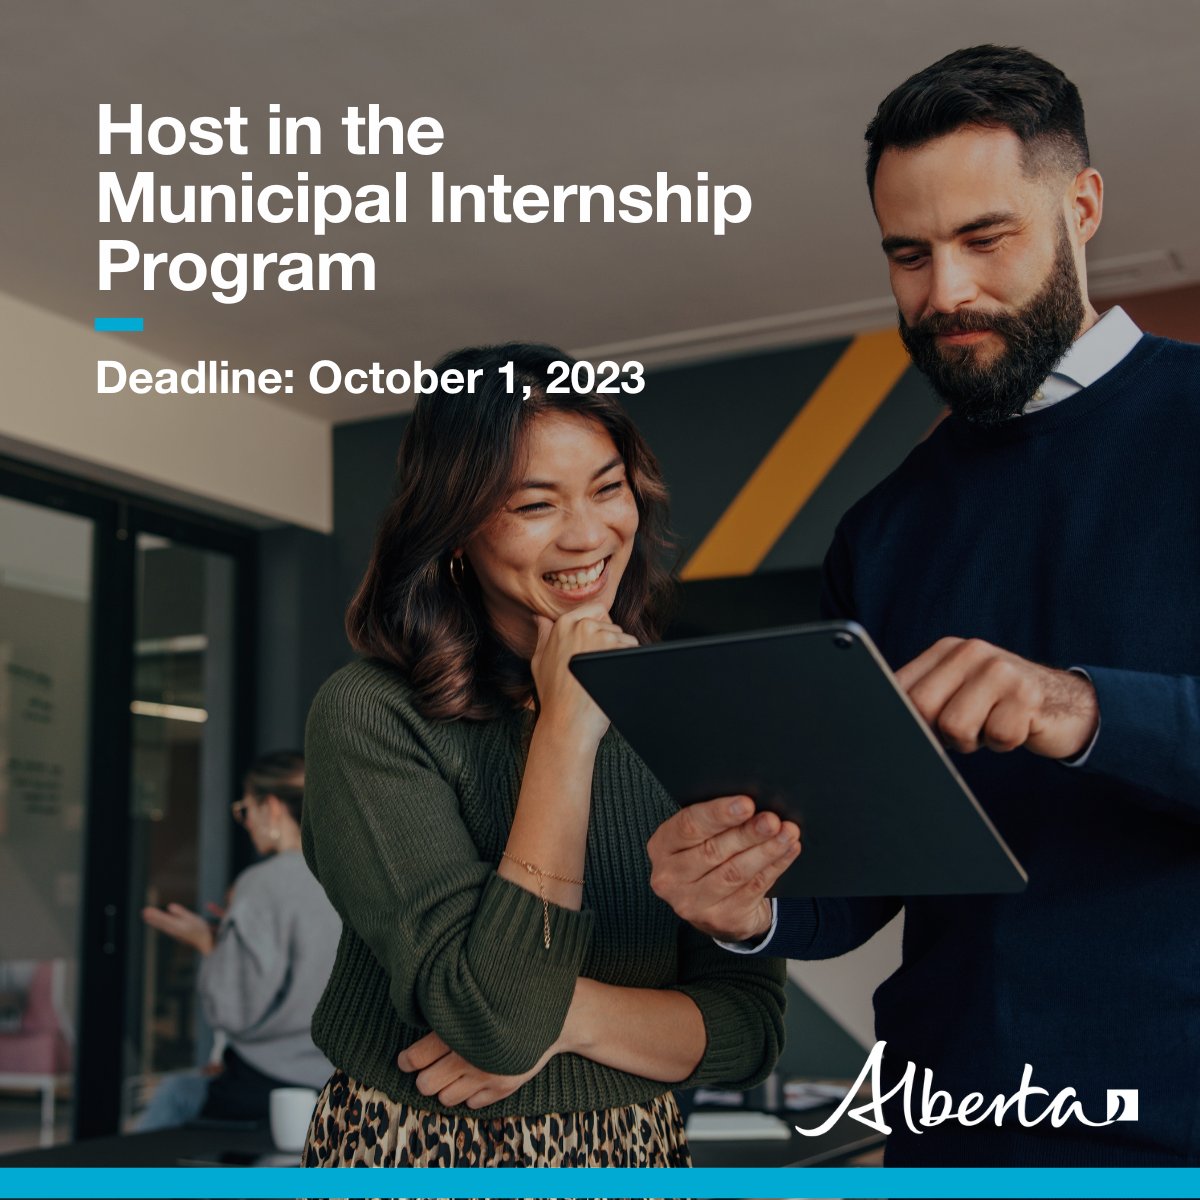 Reminder: the deadline for hosts to apply for the Municipal Internship Program is October 1. Information sessions are also available for municipalities interested in hosting. Learn more at alberta.ca/municipal-inte…